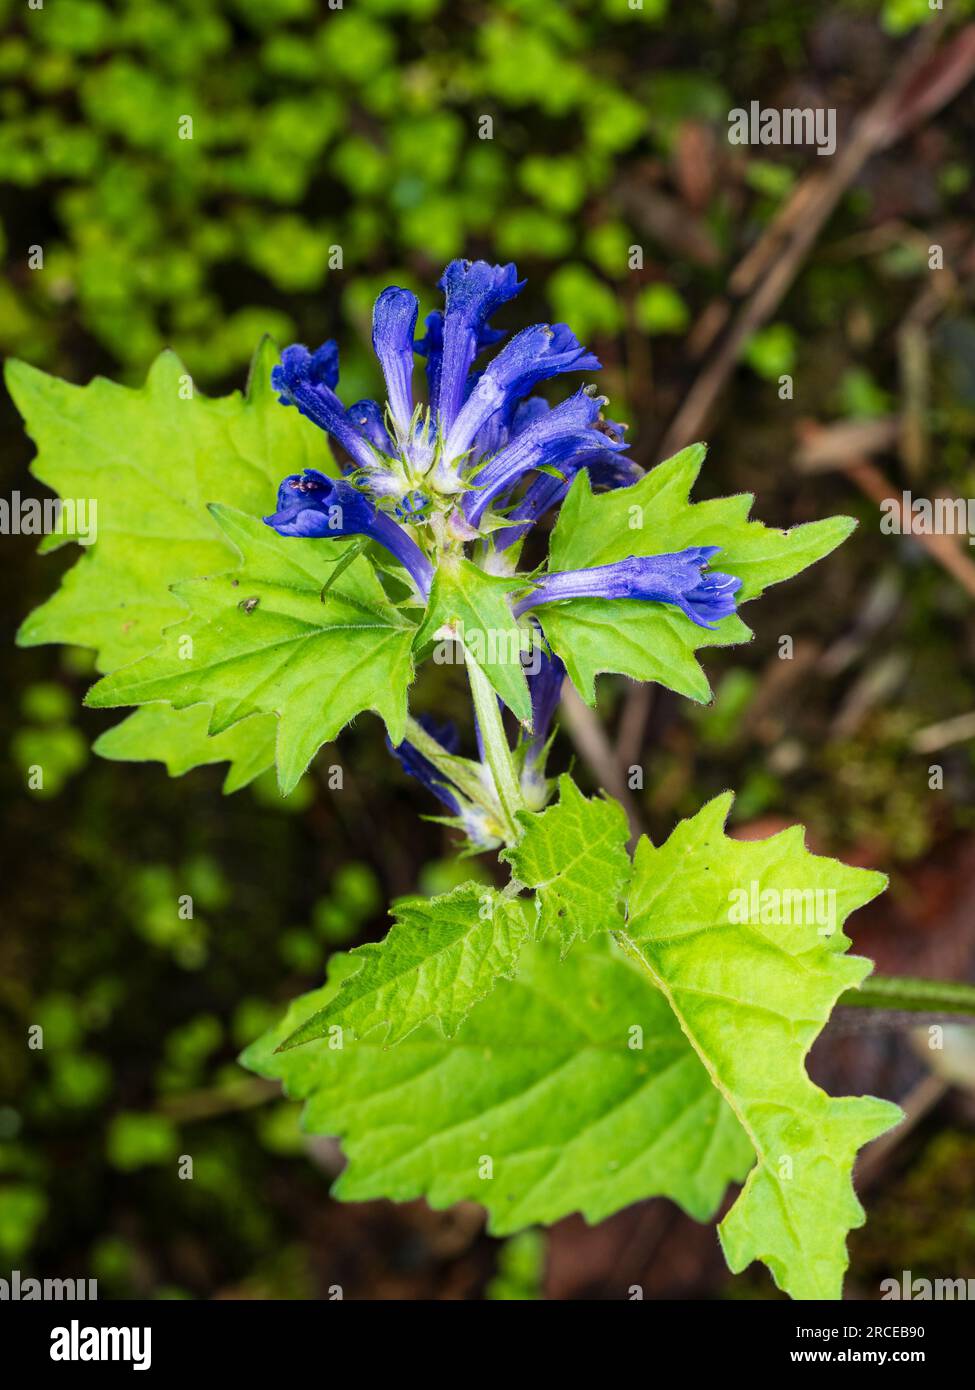 Bright blue mid to late spring flowers of the hardy, shade loving perennial giant bugle, Ajuga incisa 'Blue Enigma' Stock Photo